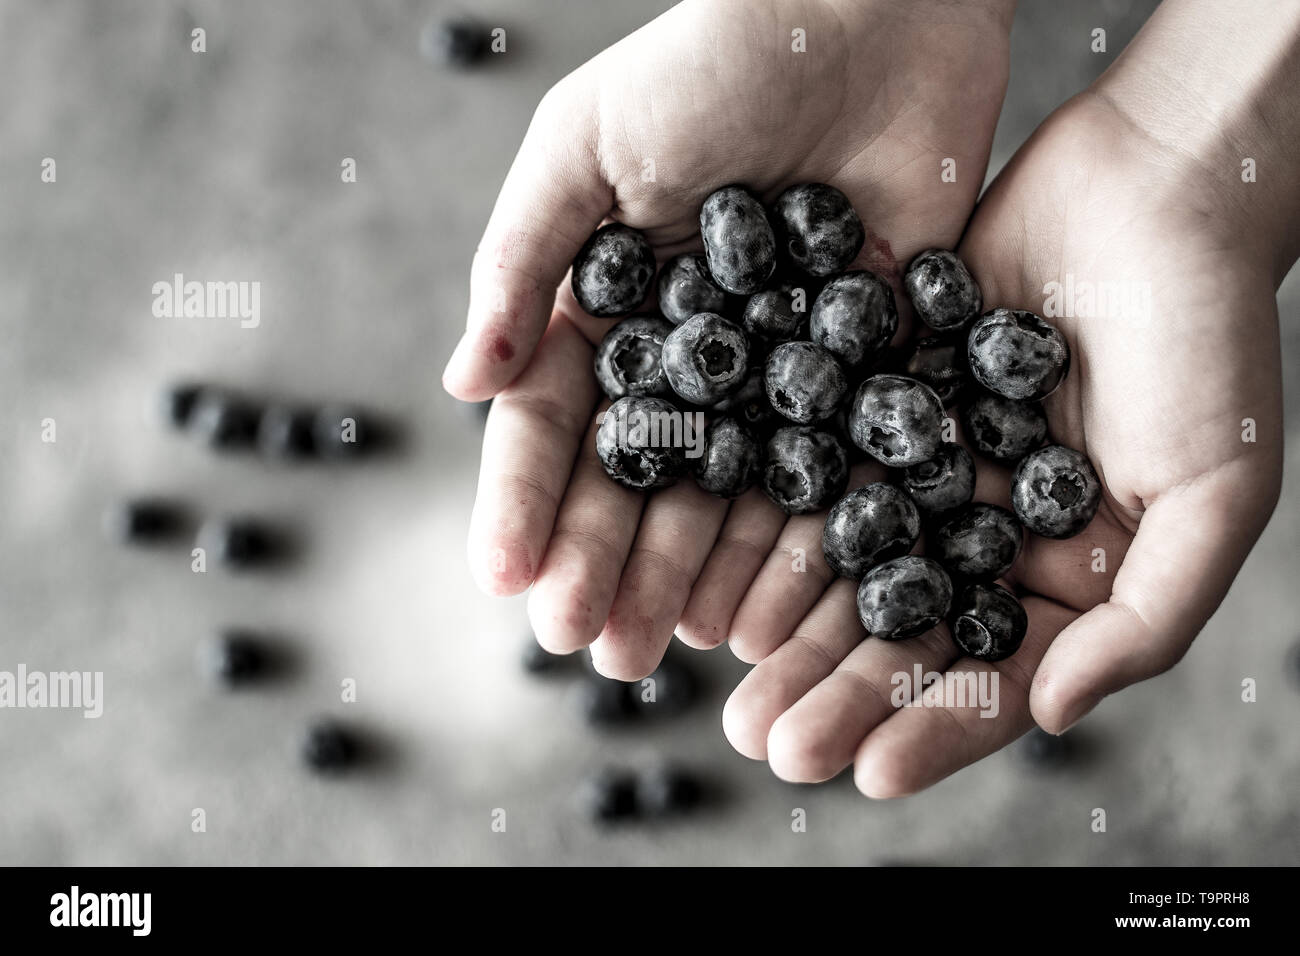 Organic Blueberries in Female Hands on Dark Background. Antioxidant Superfood Healthy Eating Concept. Stock Photo